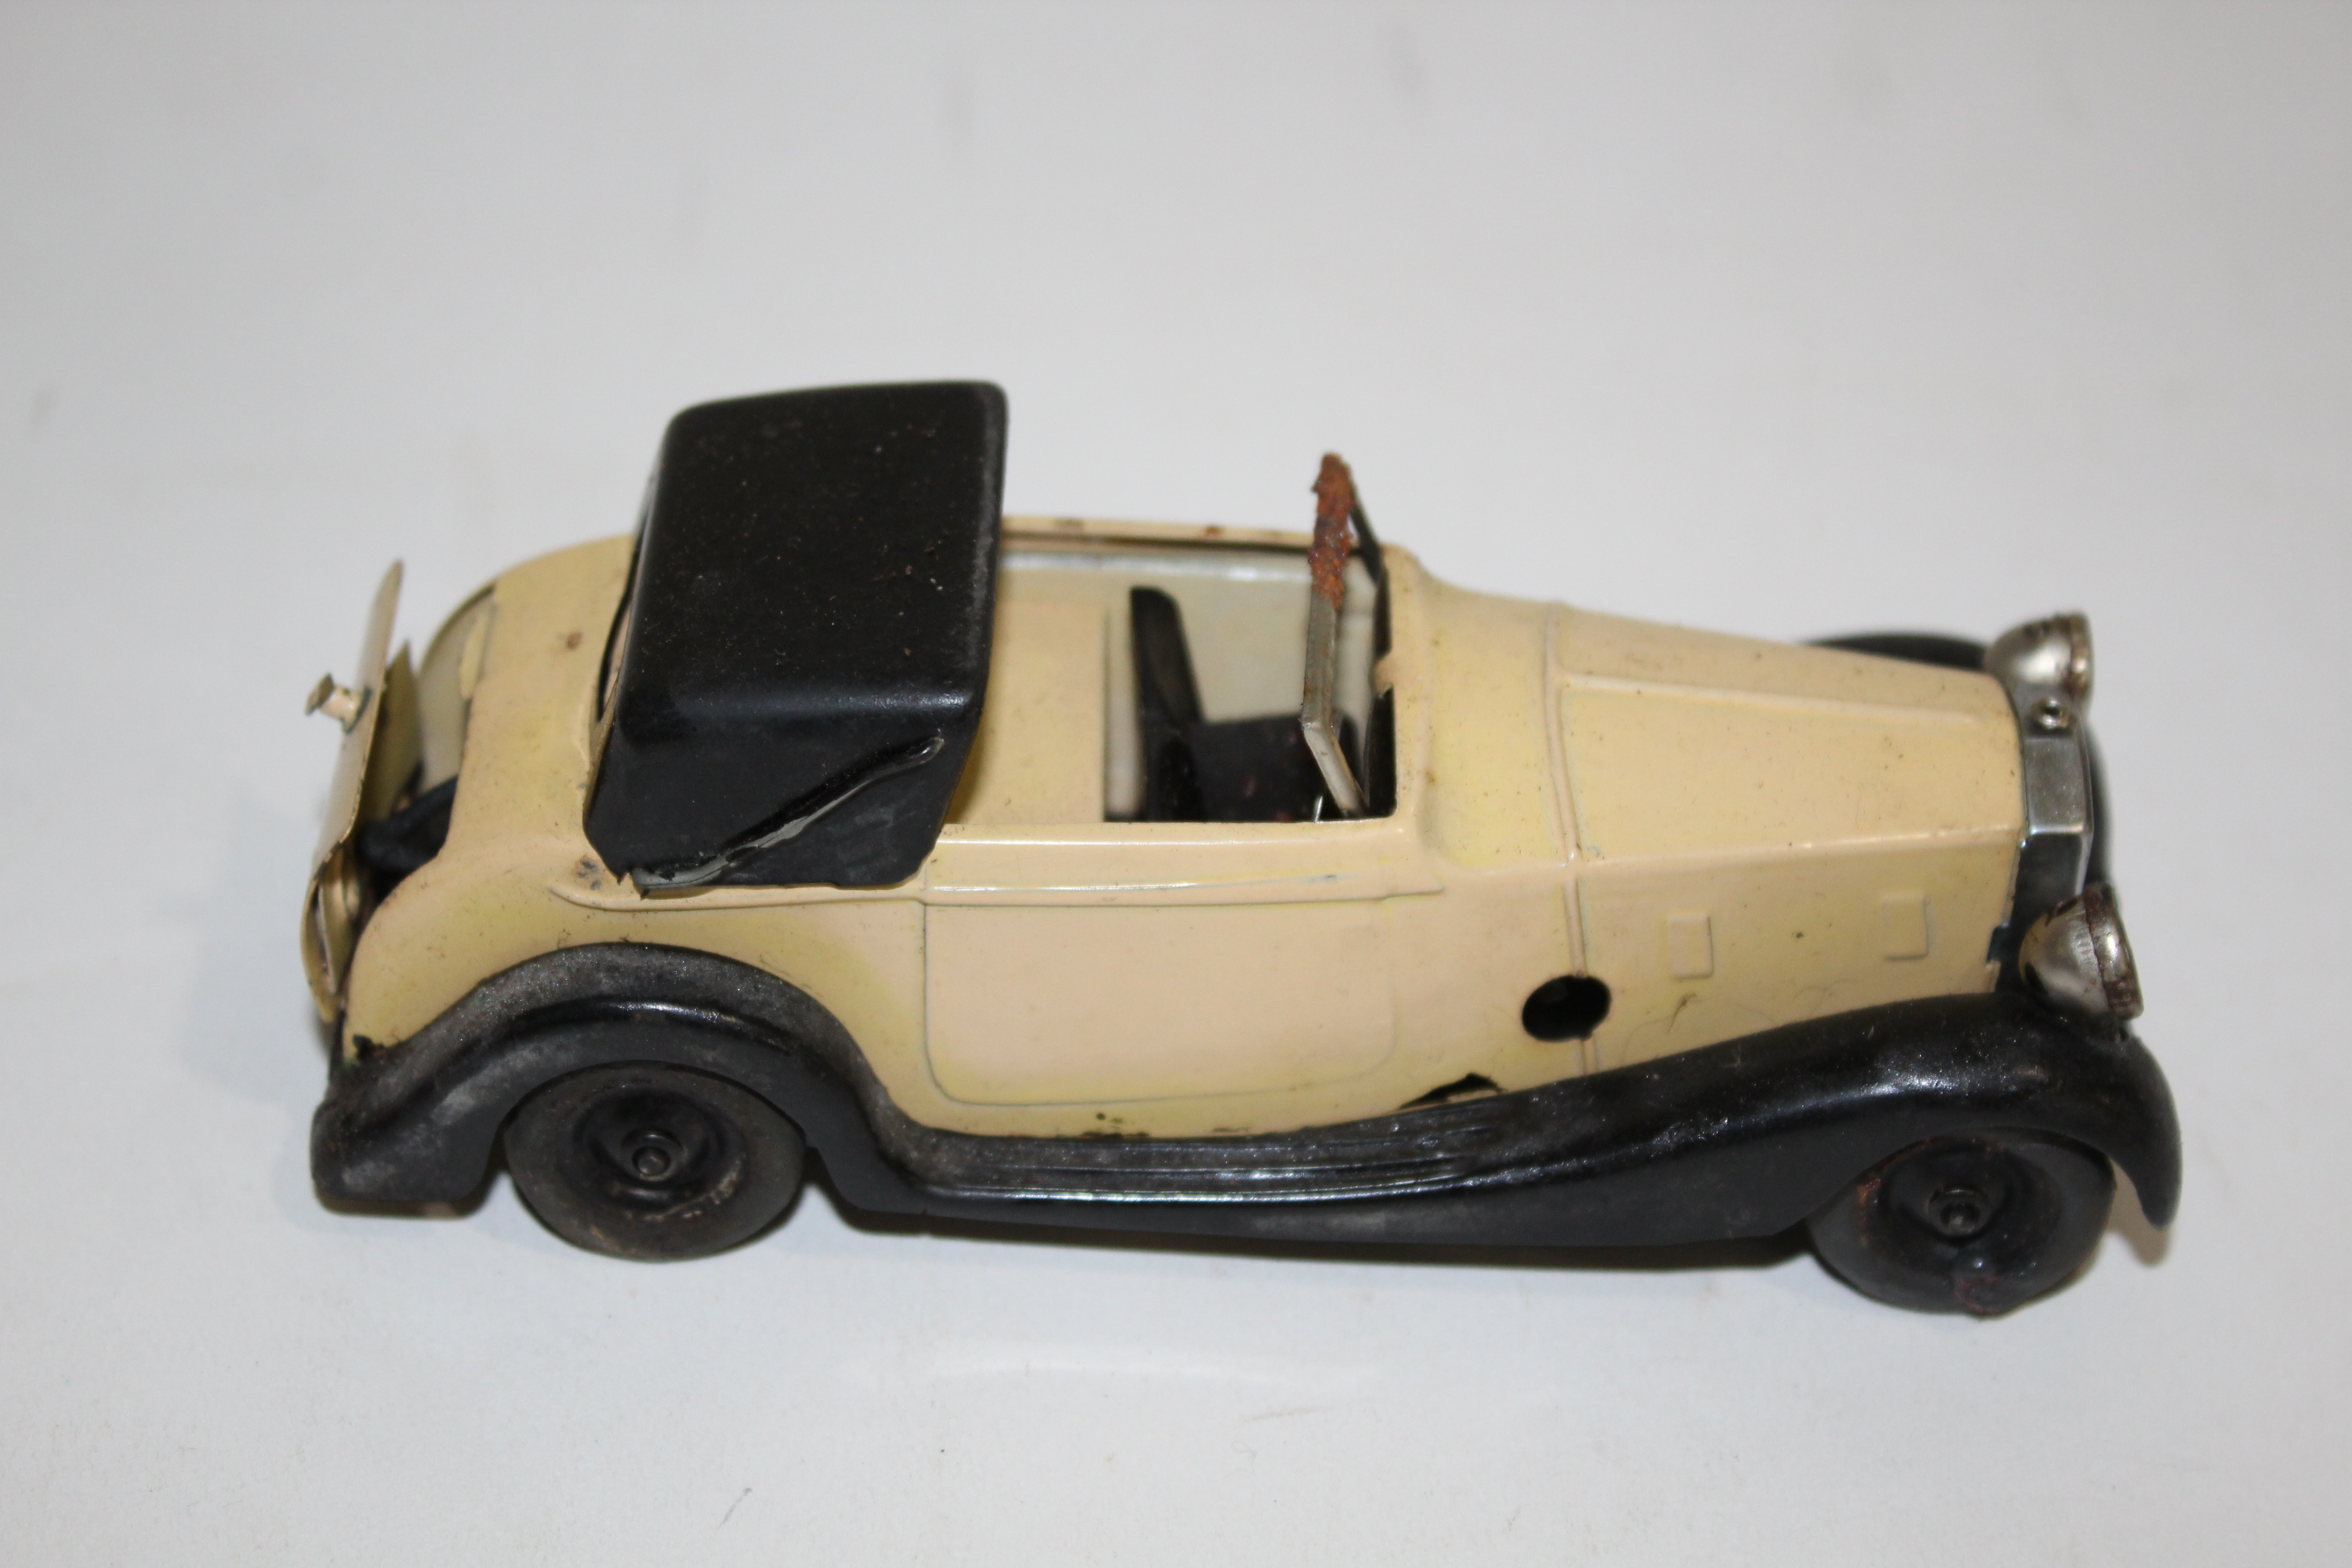 RARE TRIANG MINIC ROLLS ROYCE SEDANCA - ELECTRIC HEADLAMPS Model No 50M, with a black hood and wings - Image 11 of 14